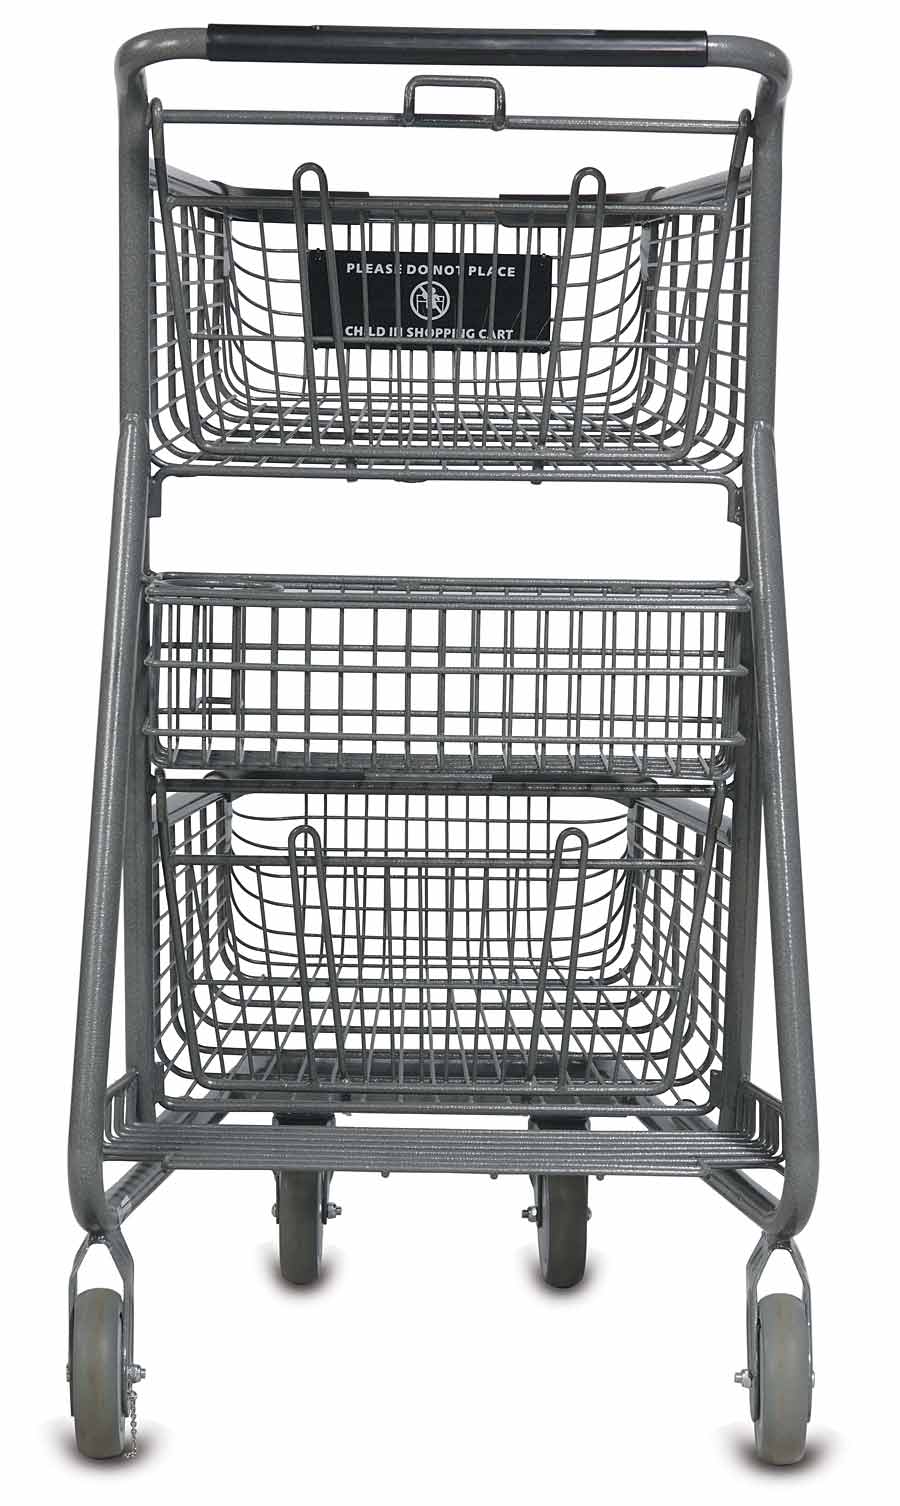 Express6050 Metal Grocery Shopping Cart with Lower Tray